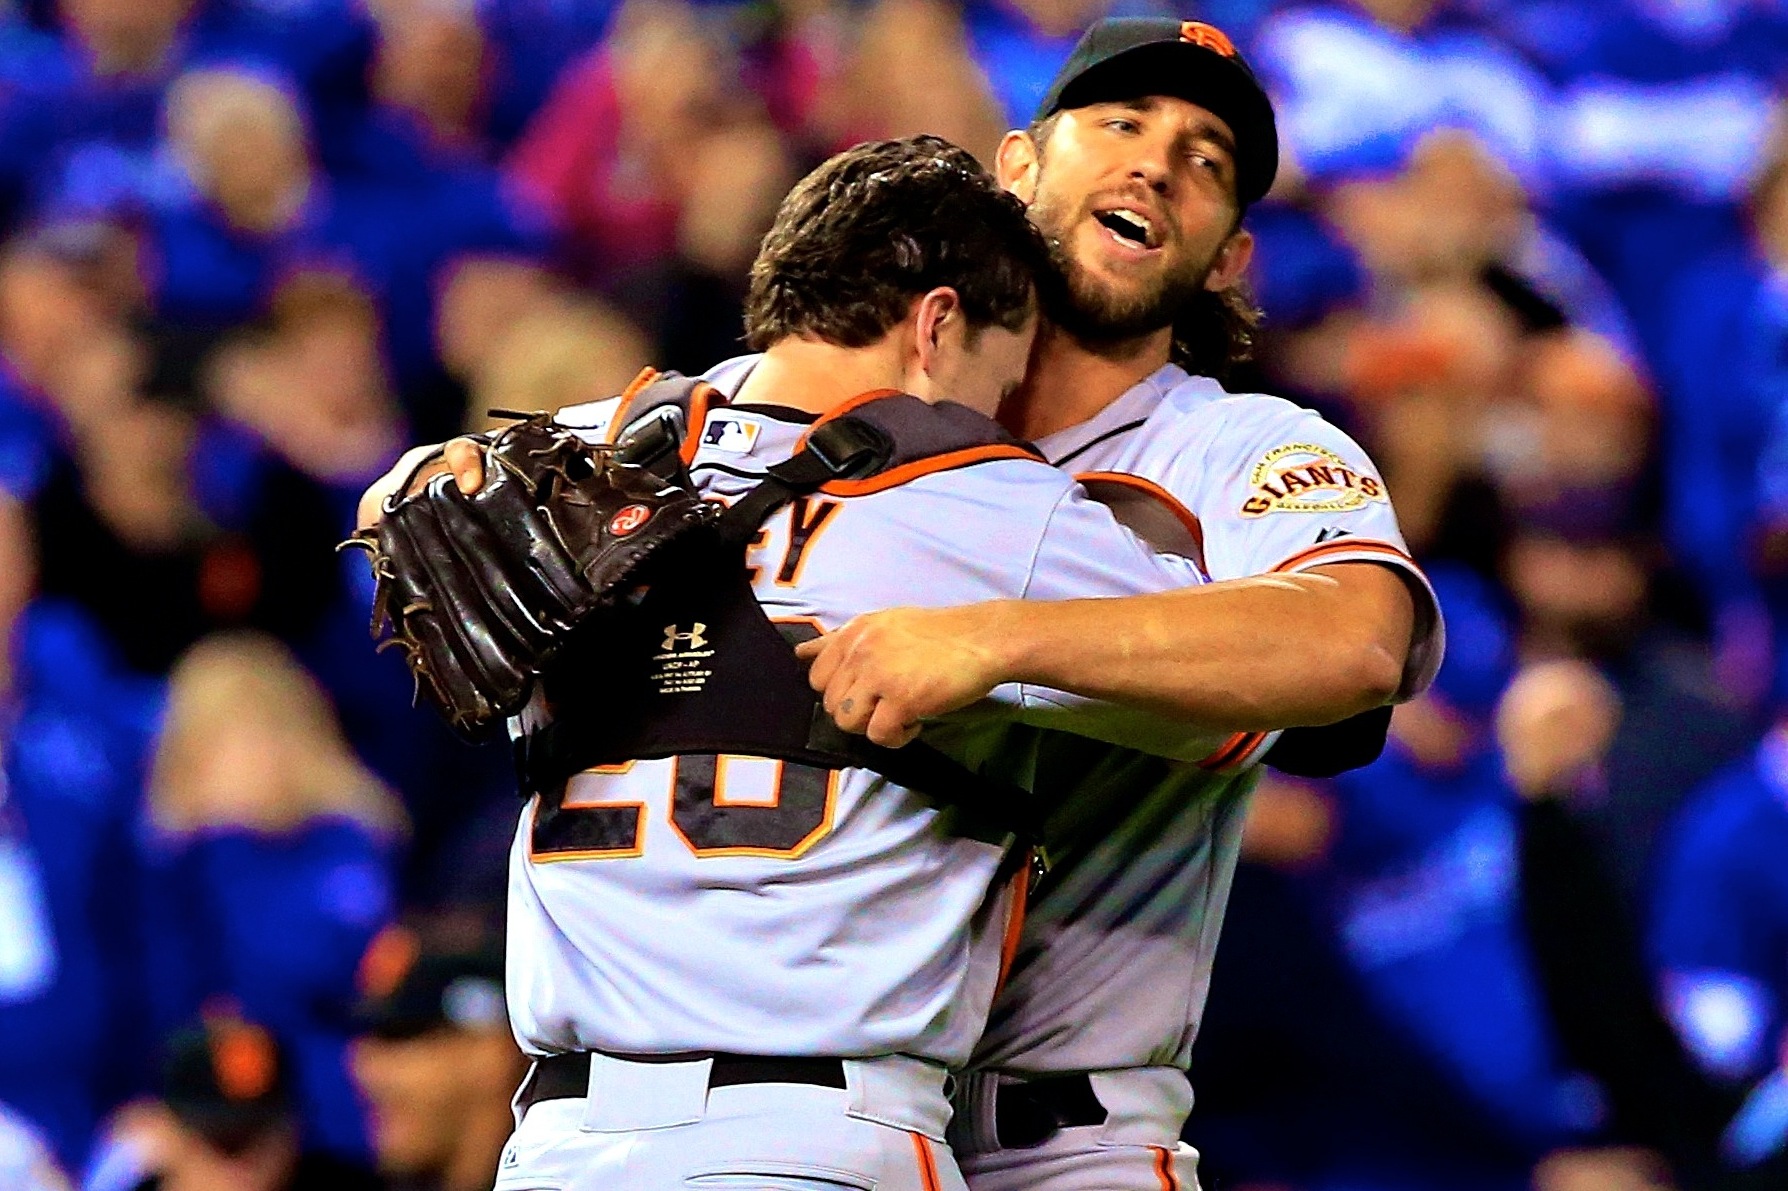 Madison Bumgarner, Giants beat Royals for 3-2 World Series lead